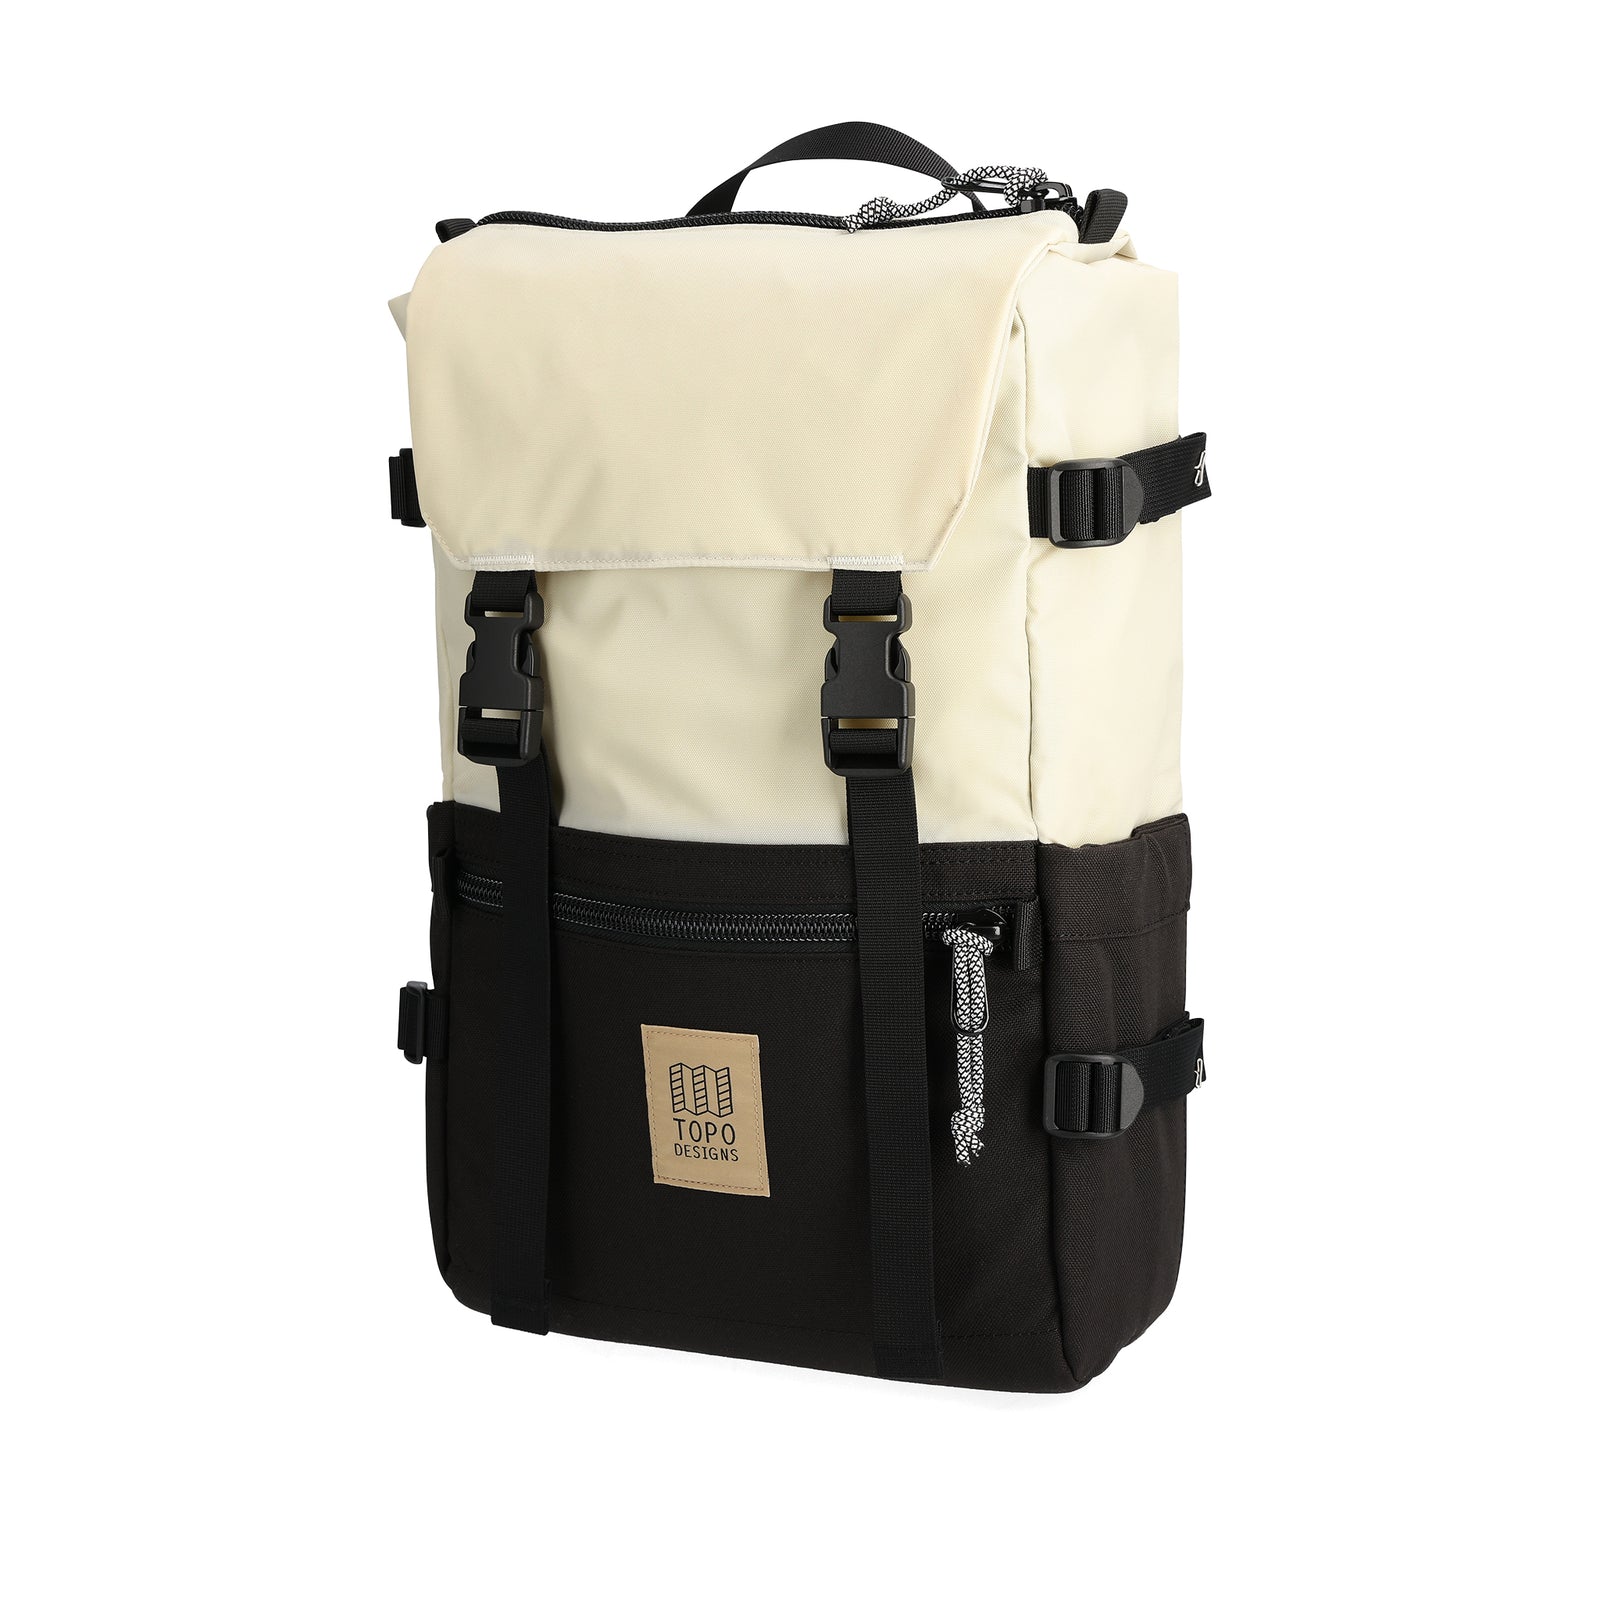 Front View of Topo Designs Rover Pack Classic in "Bone White / Black"